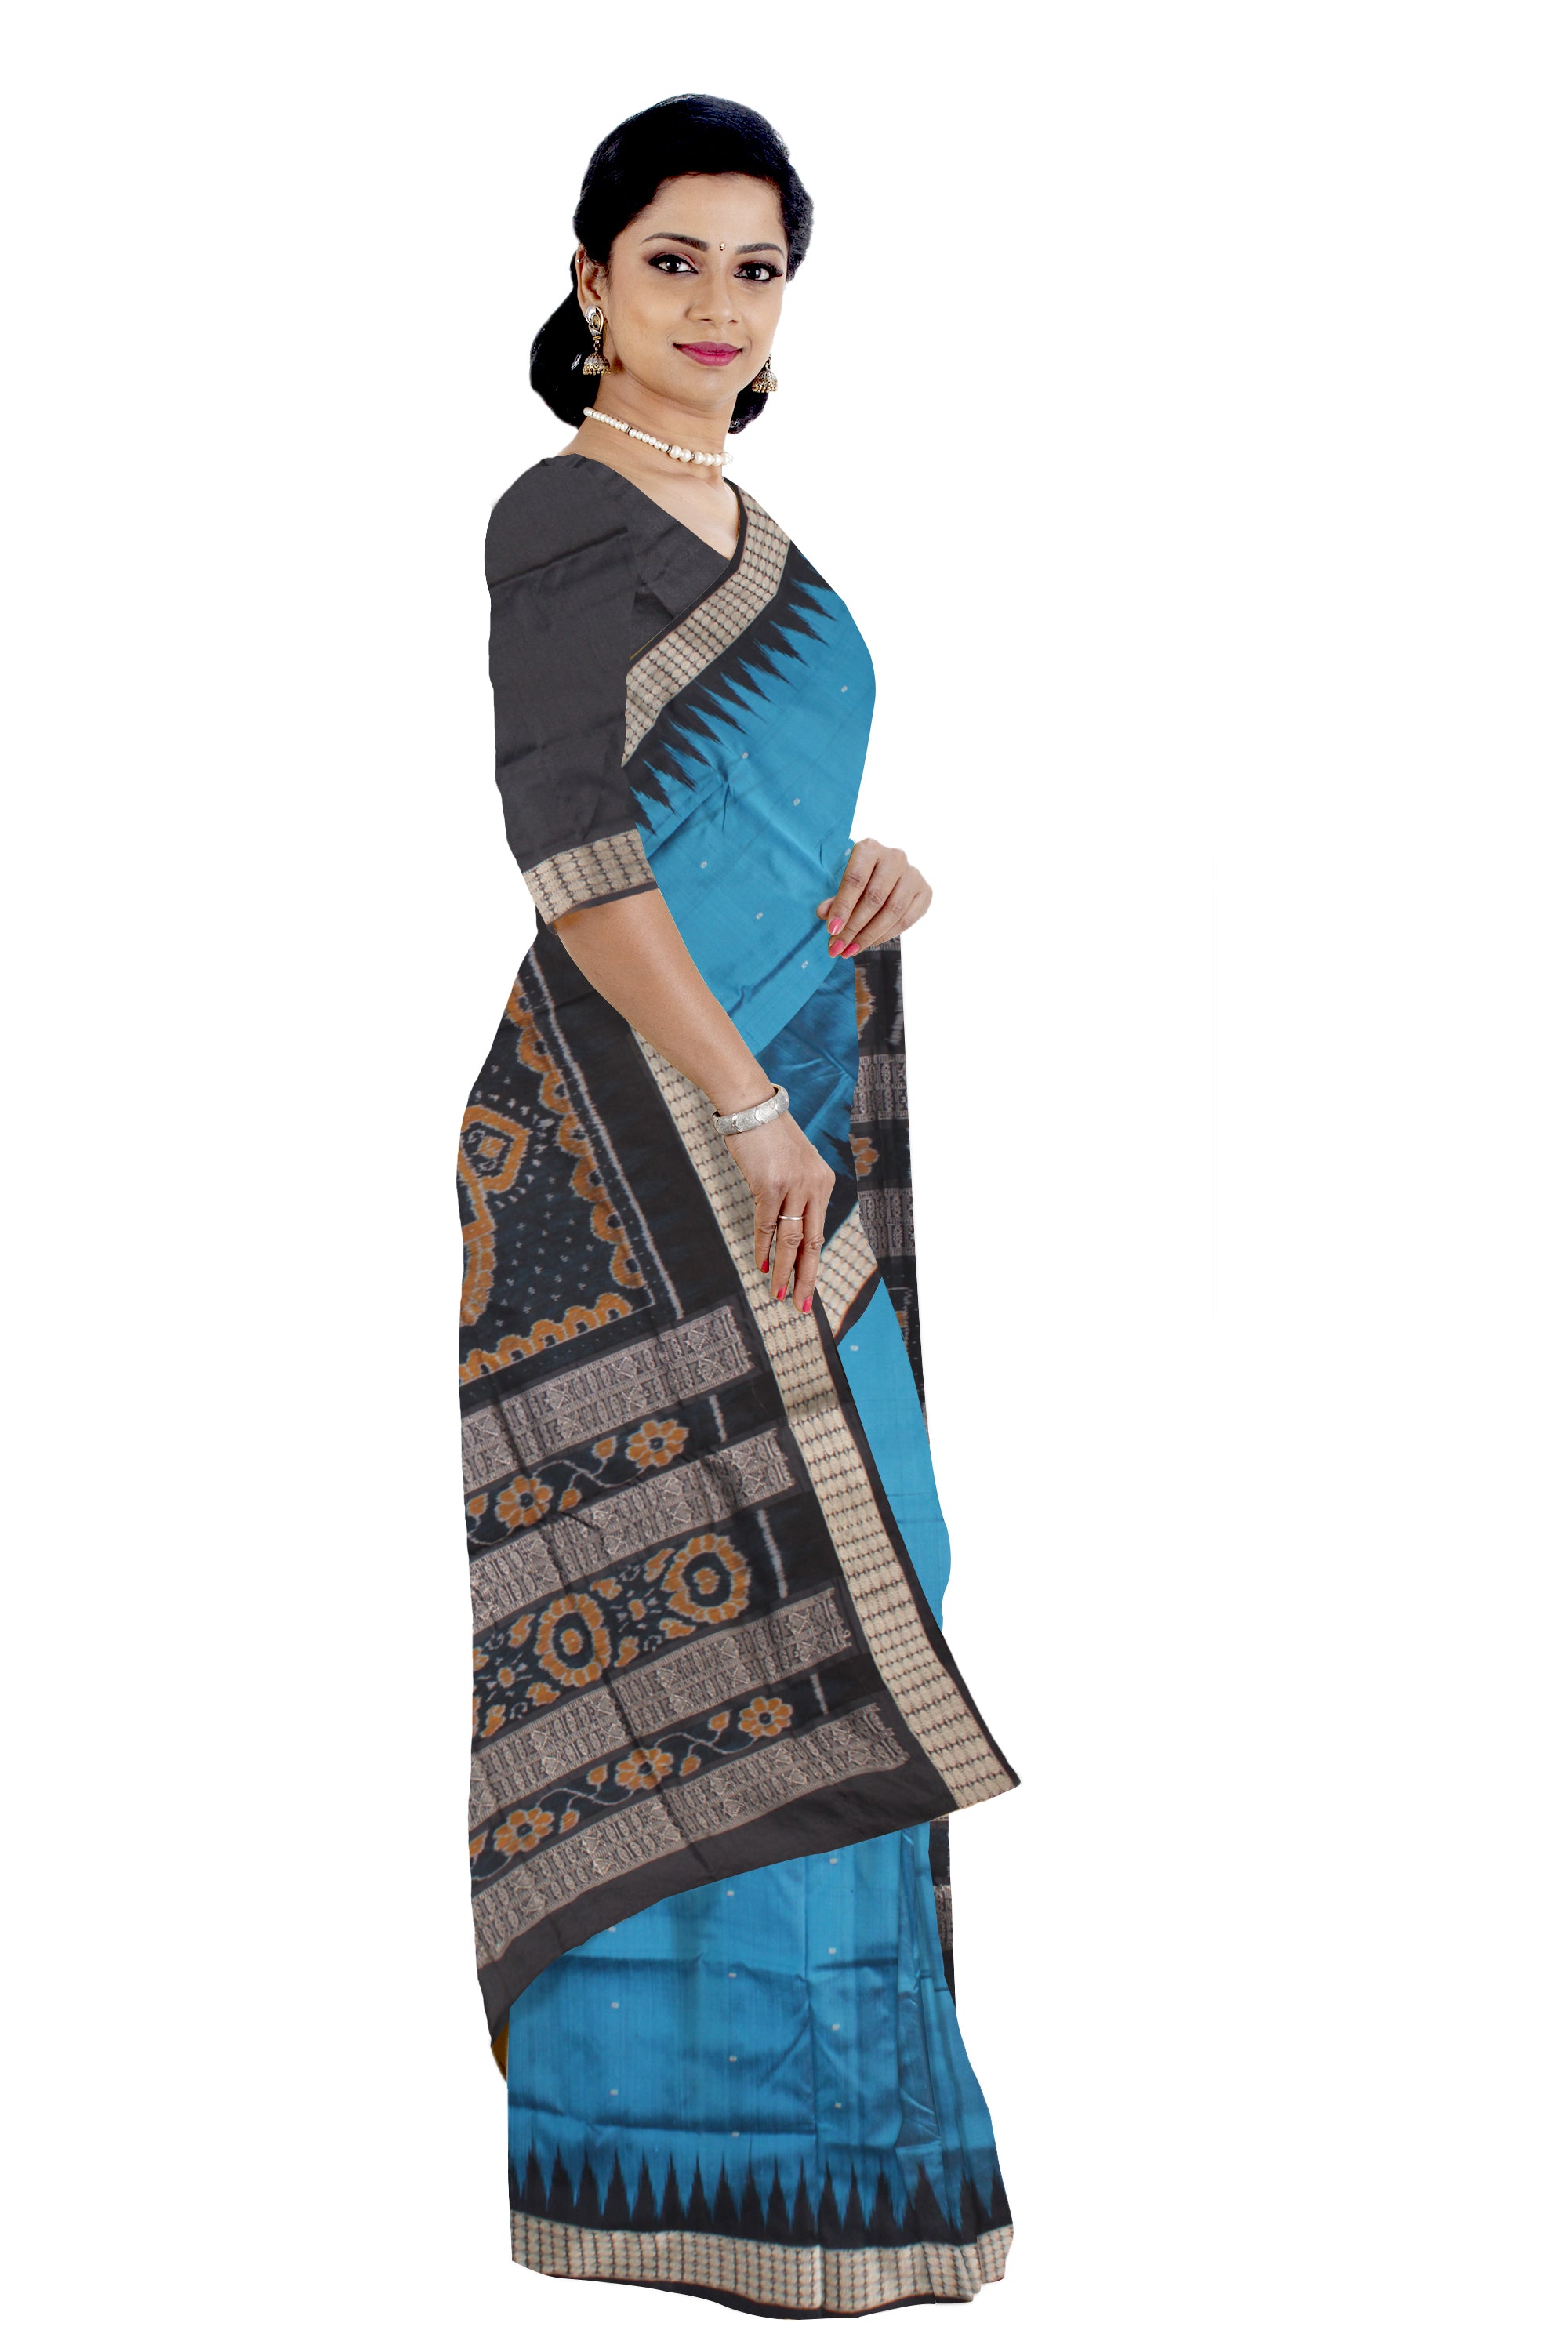 SKY AND BLACK COLOR SMALL BOOTY PATTERN PATA SAREE,WITH MATCHING BLOUSE PIECE. - Koshali Arts & Crafts Enterprise